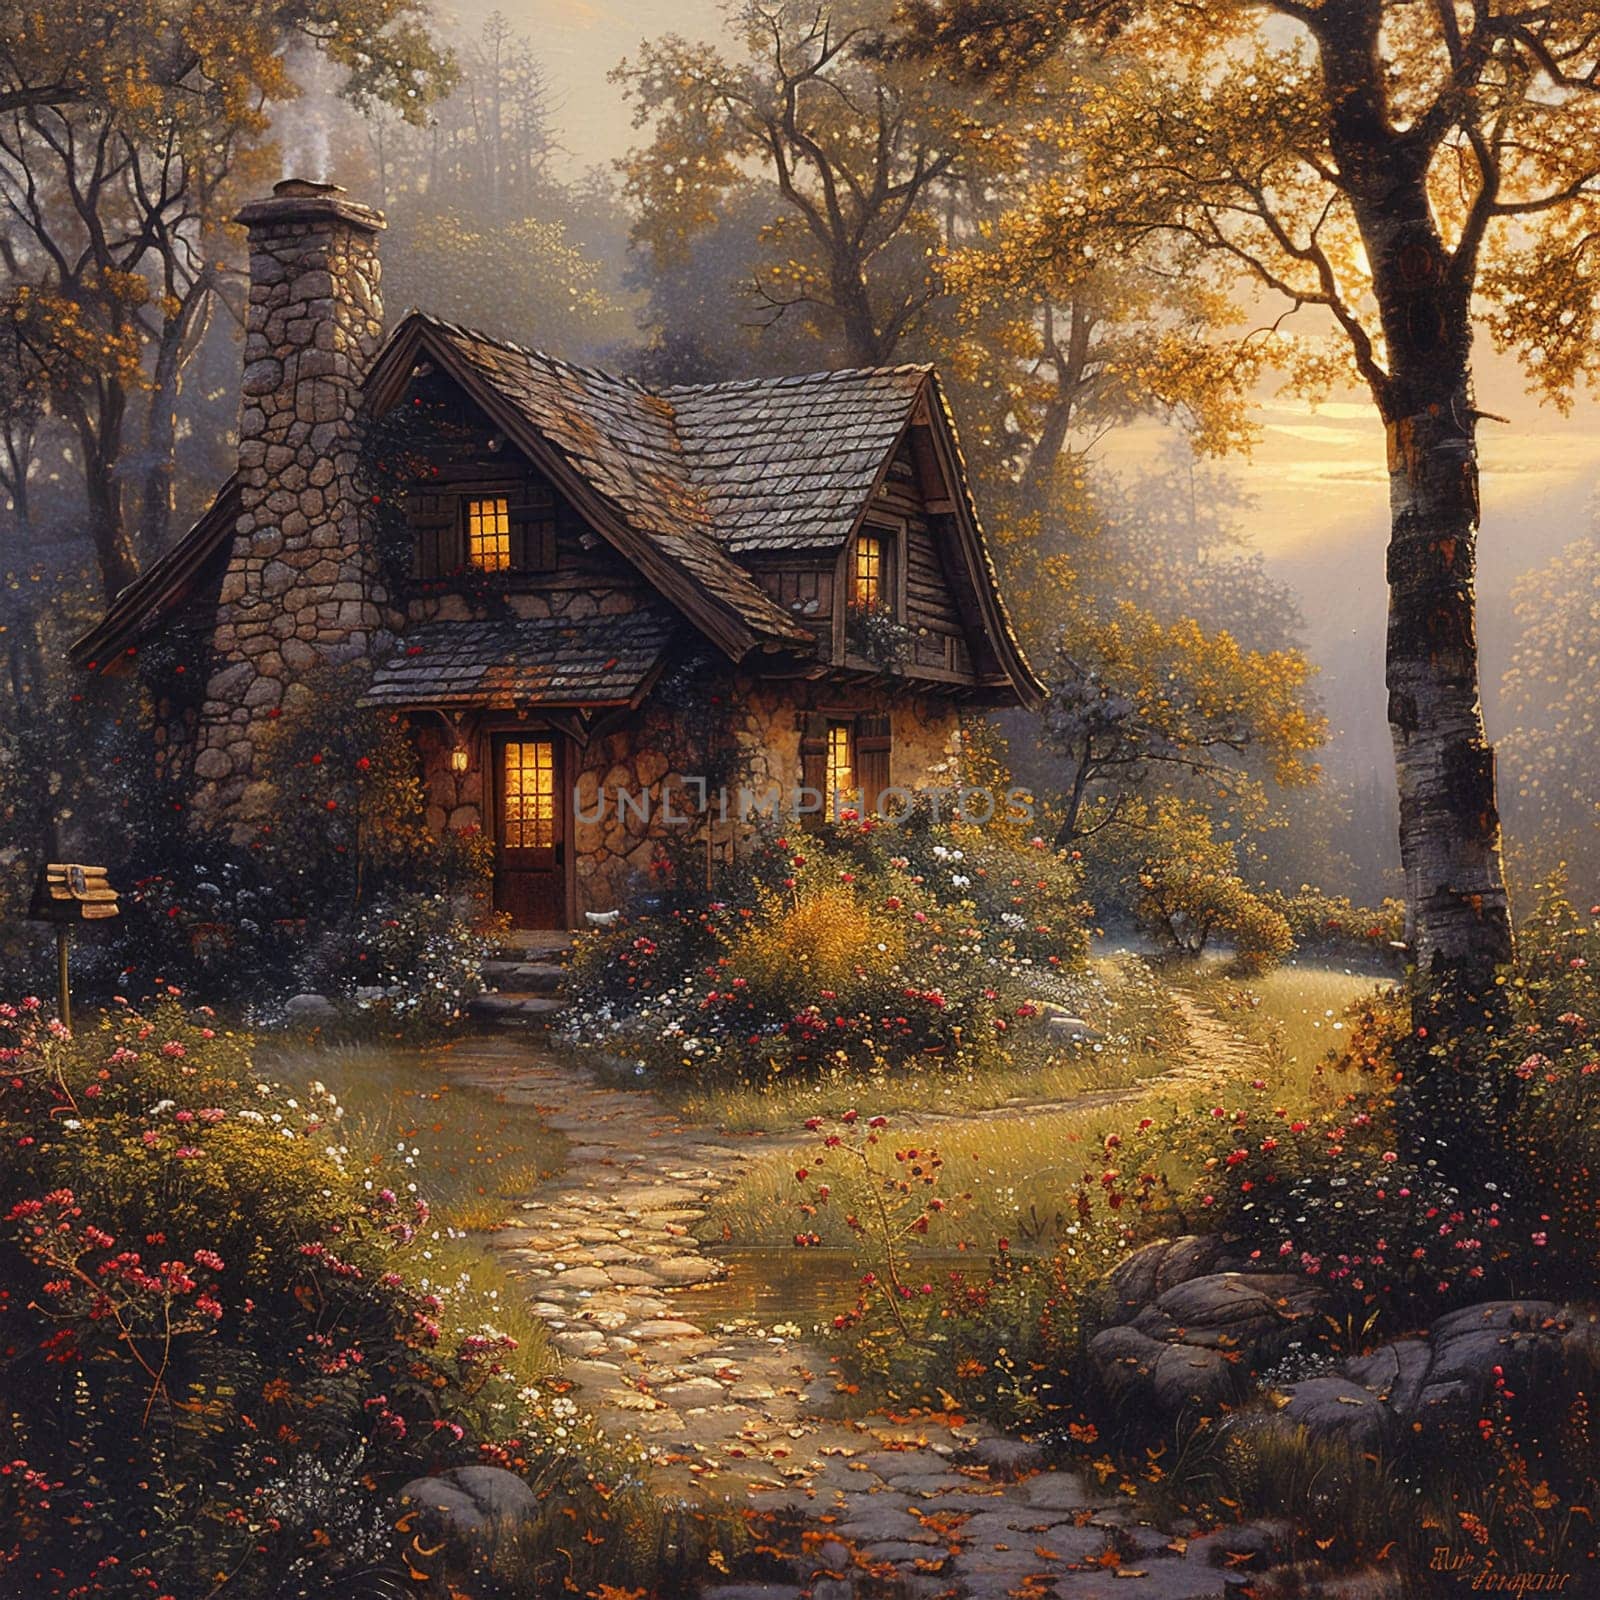 Rustic cabin in the woods depicted with a Thomas Kincade-like focus on light and idyllic settings.